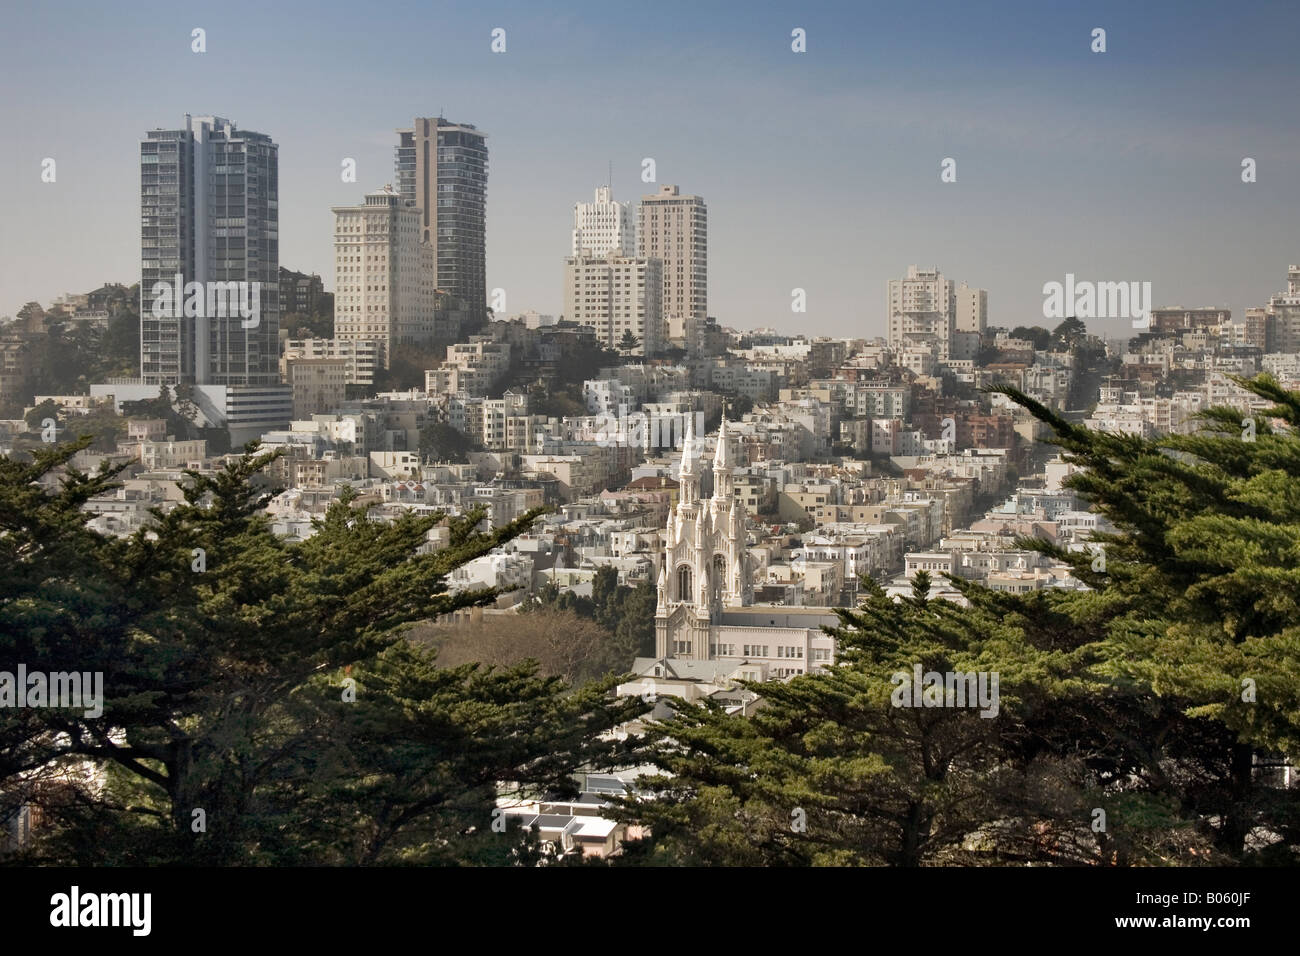 Russian Hill, San Francisco Blick auf die Skyline von Russian Hill in San Francisco vom Fuße des Coit Tower. Stockfoto